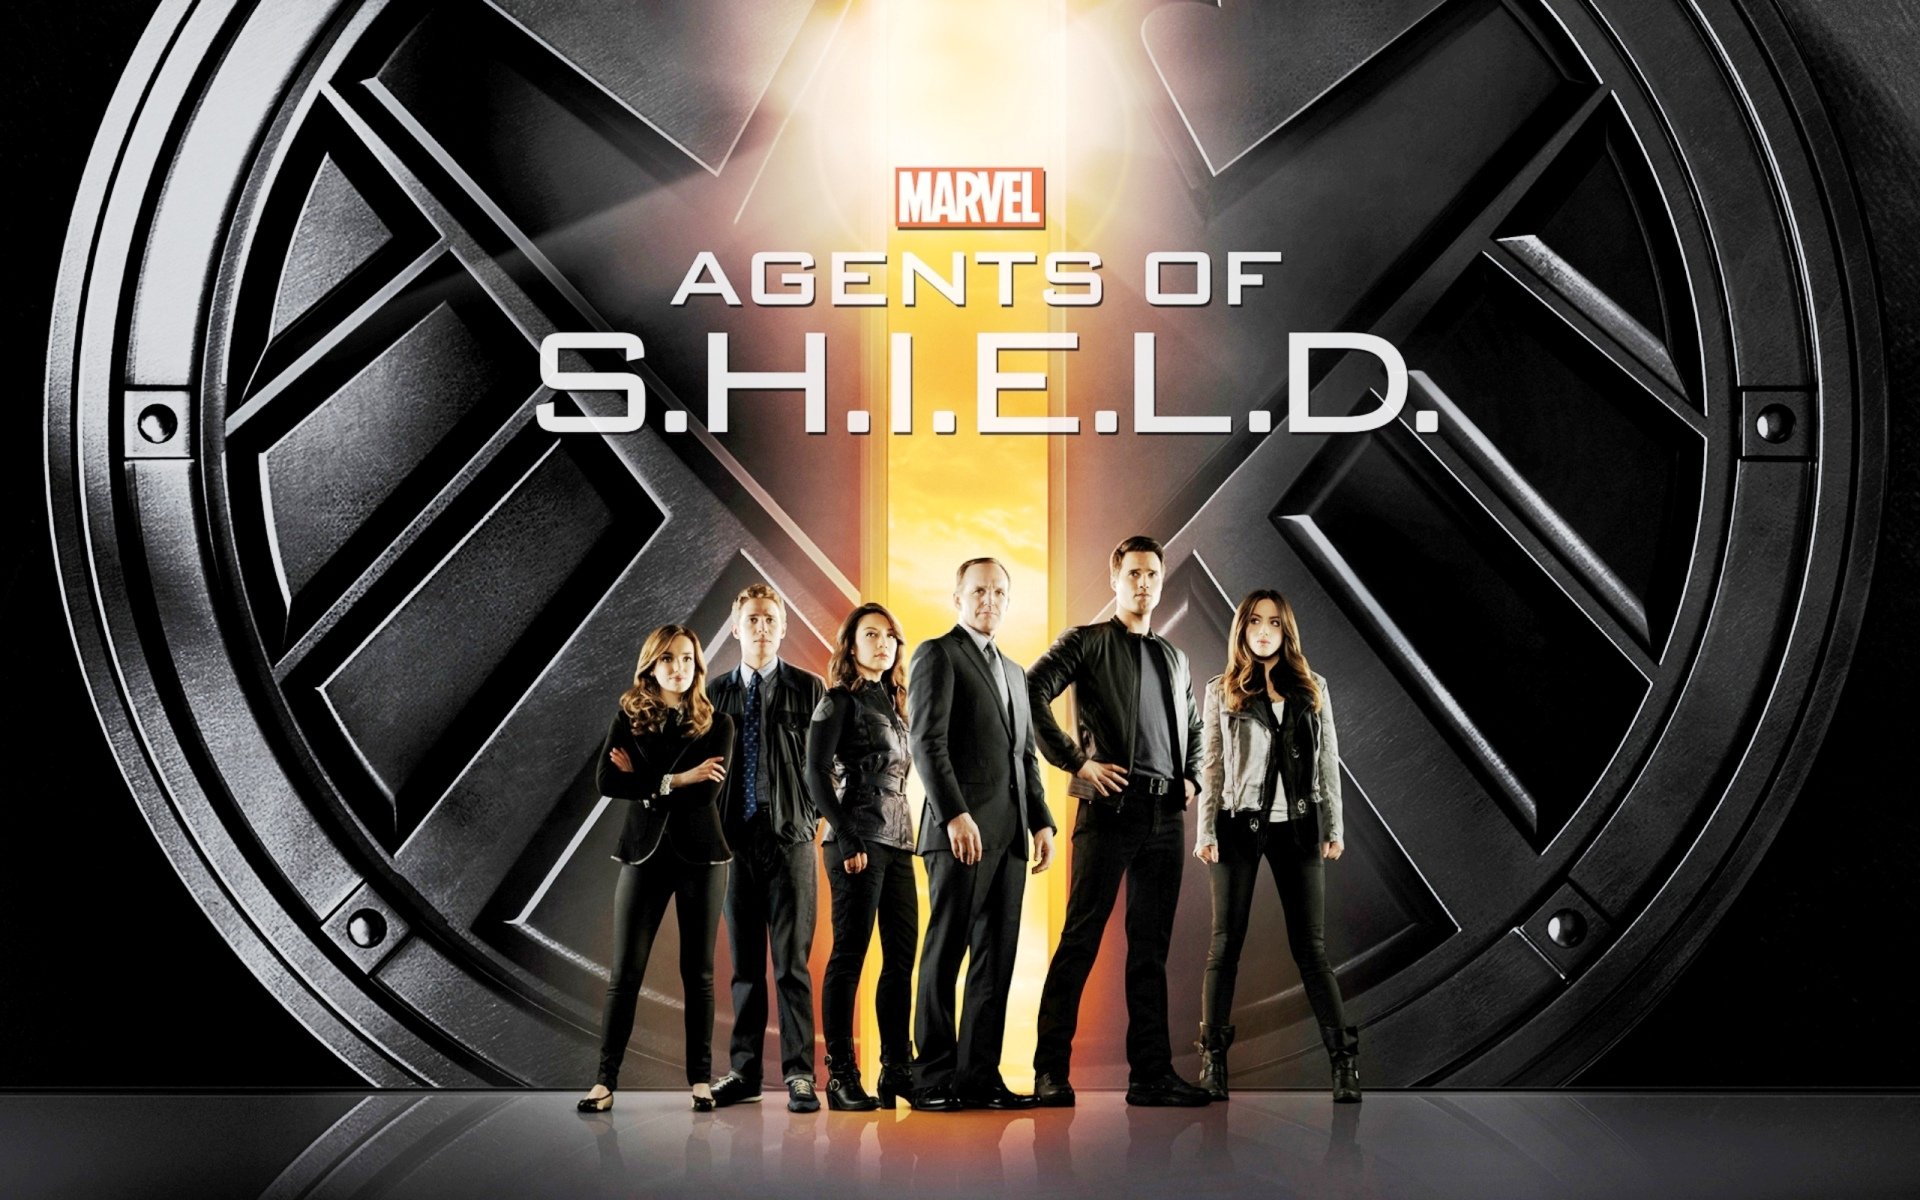 Agents Of Shield Action Drama Sci Fi Marvel Ic